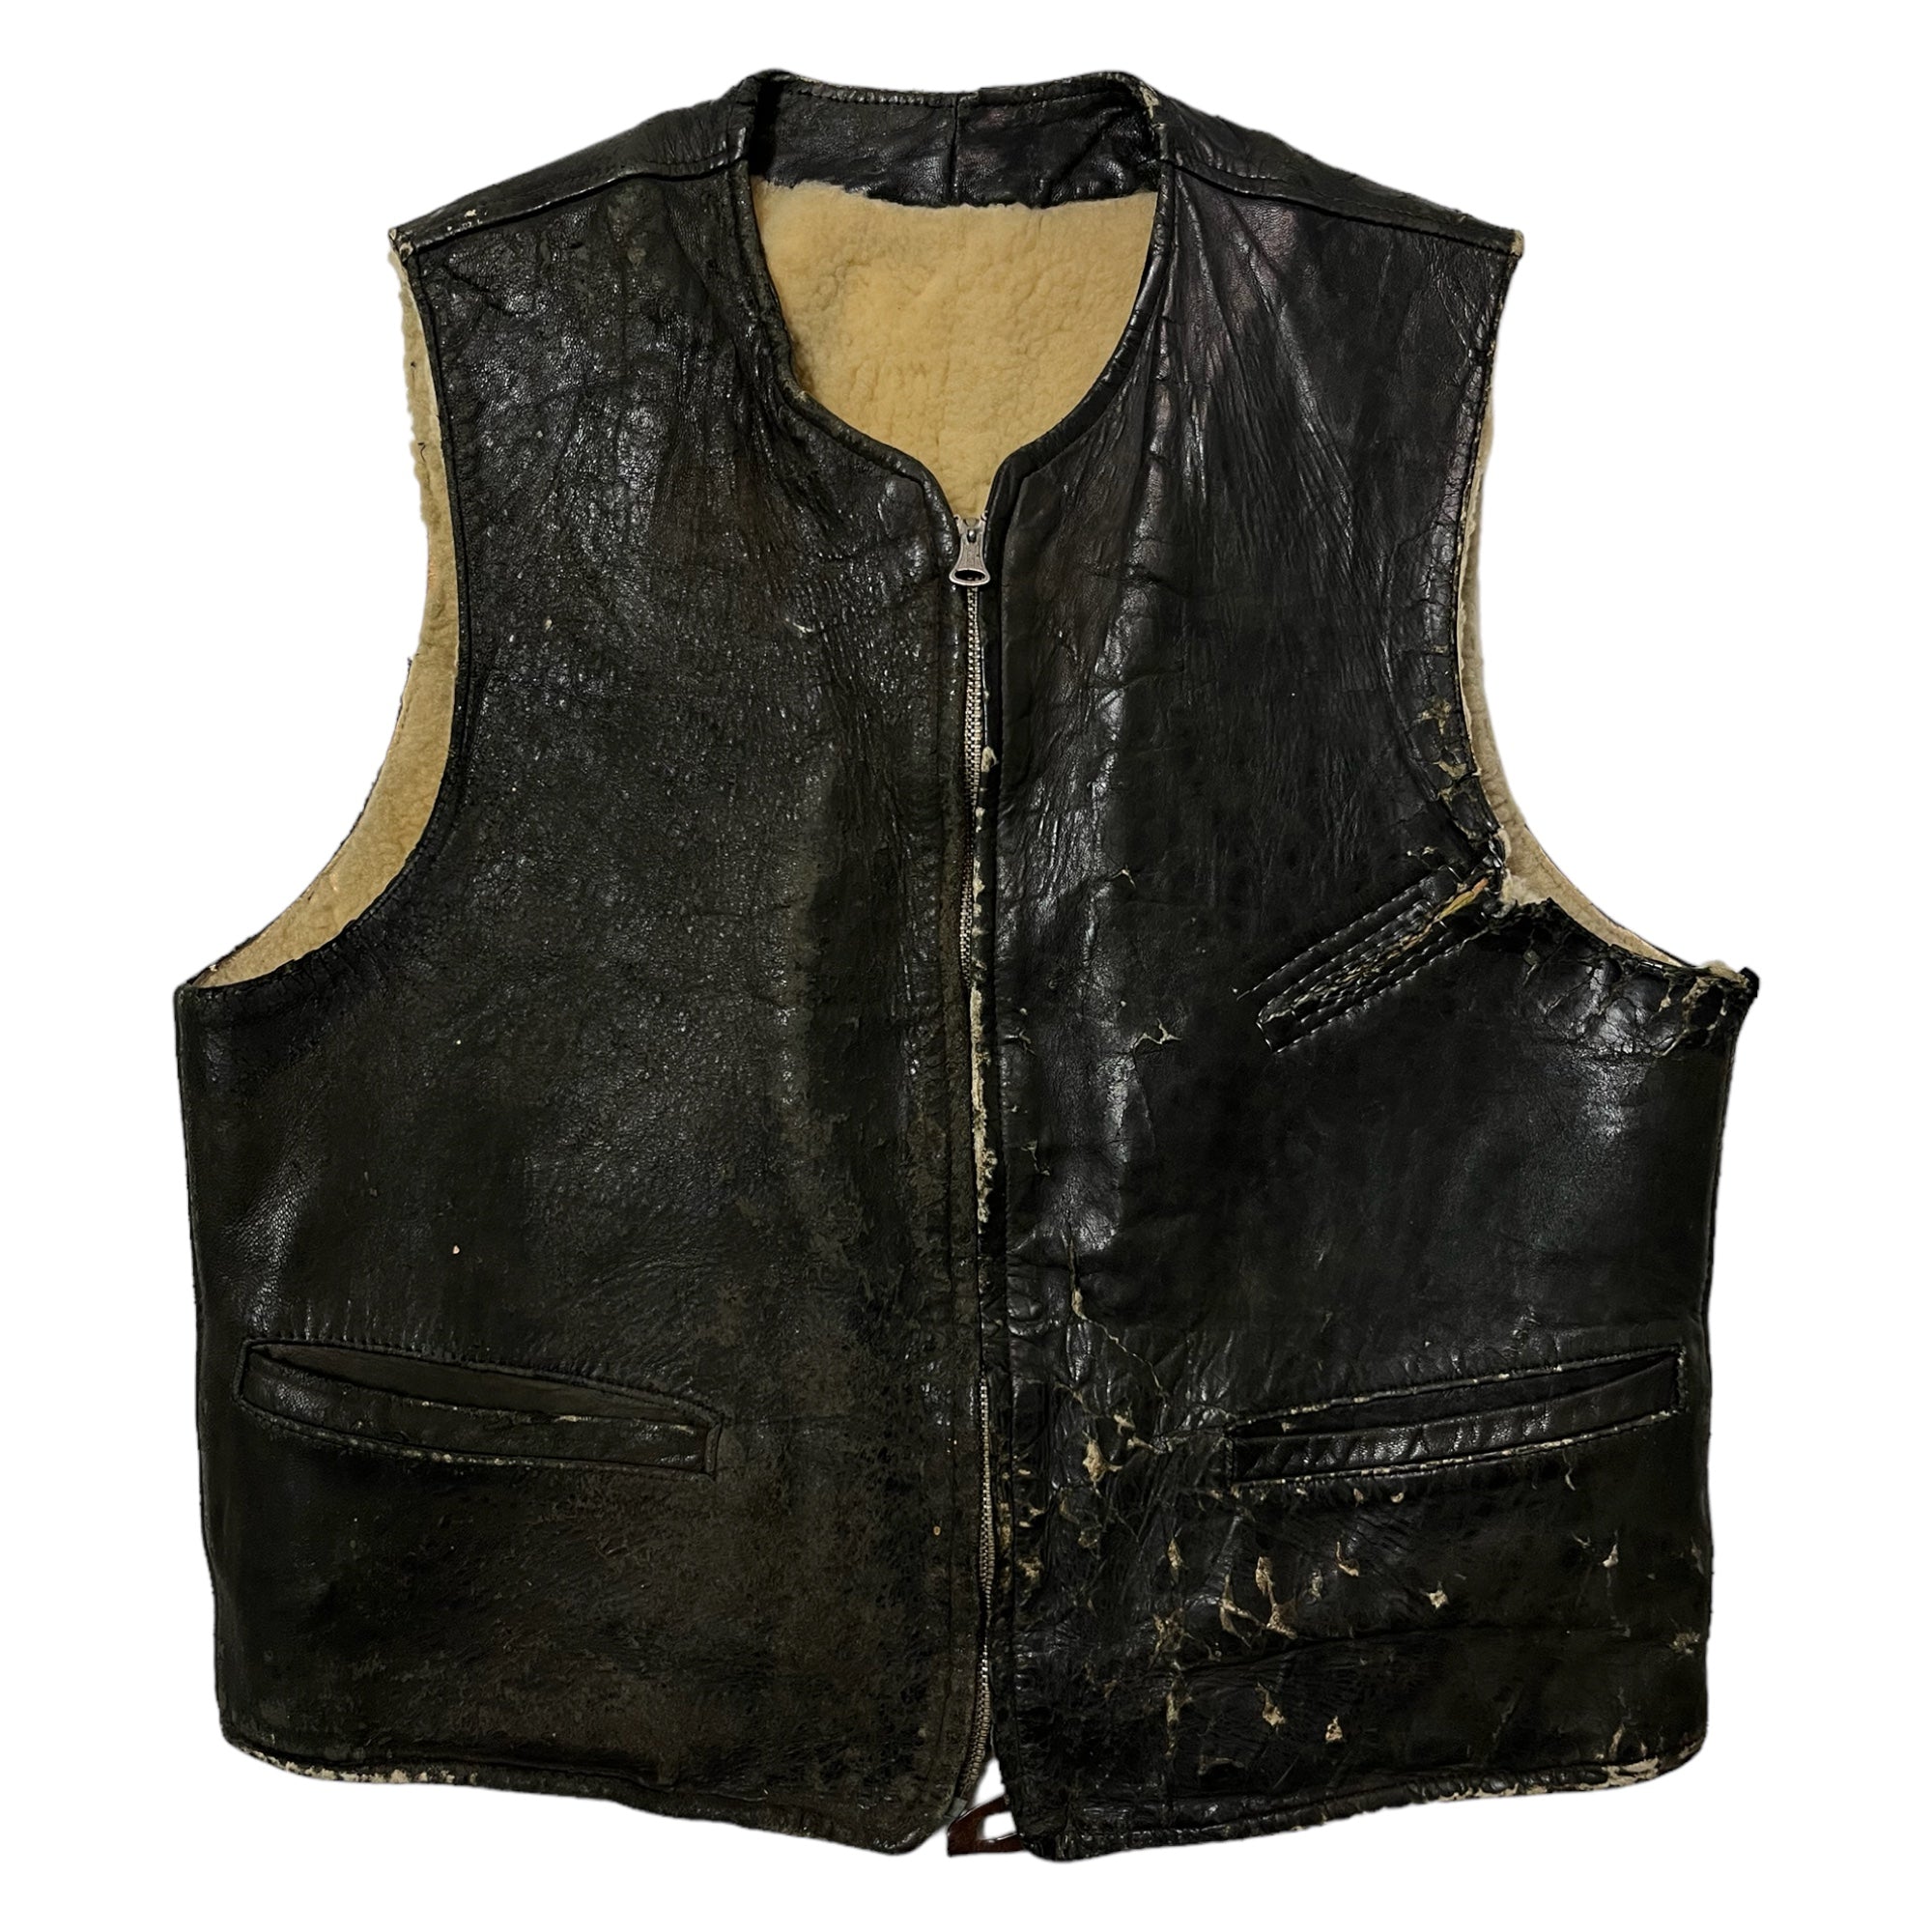 1930s Leather Shearling-Lined Vest with Fishing-Line Repair - Distressed Black - XS/S